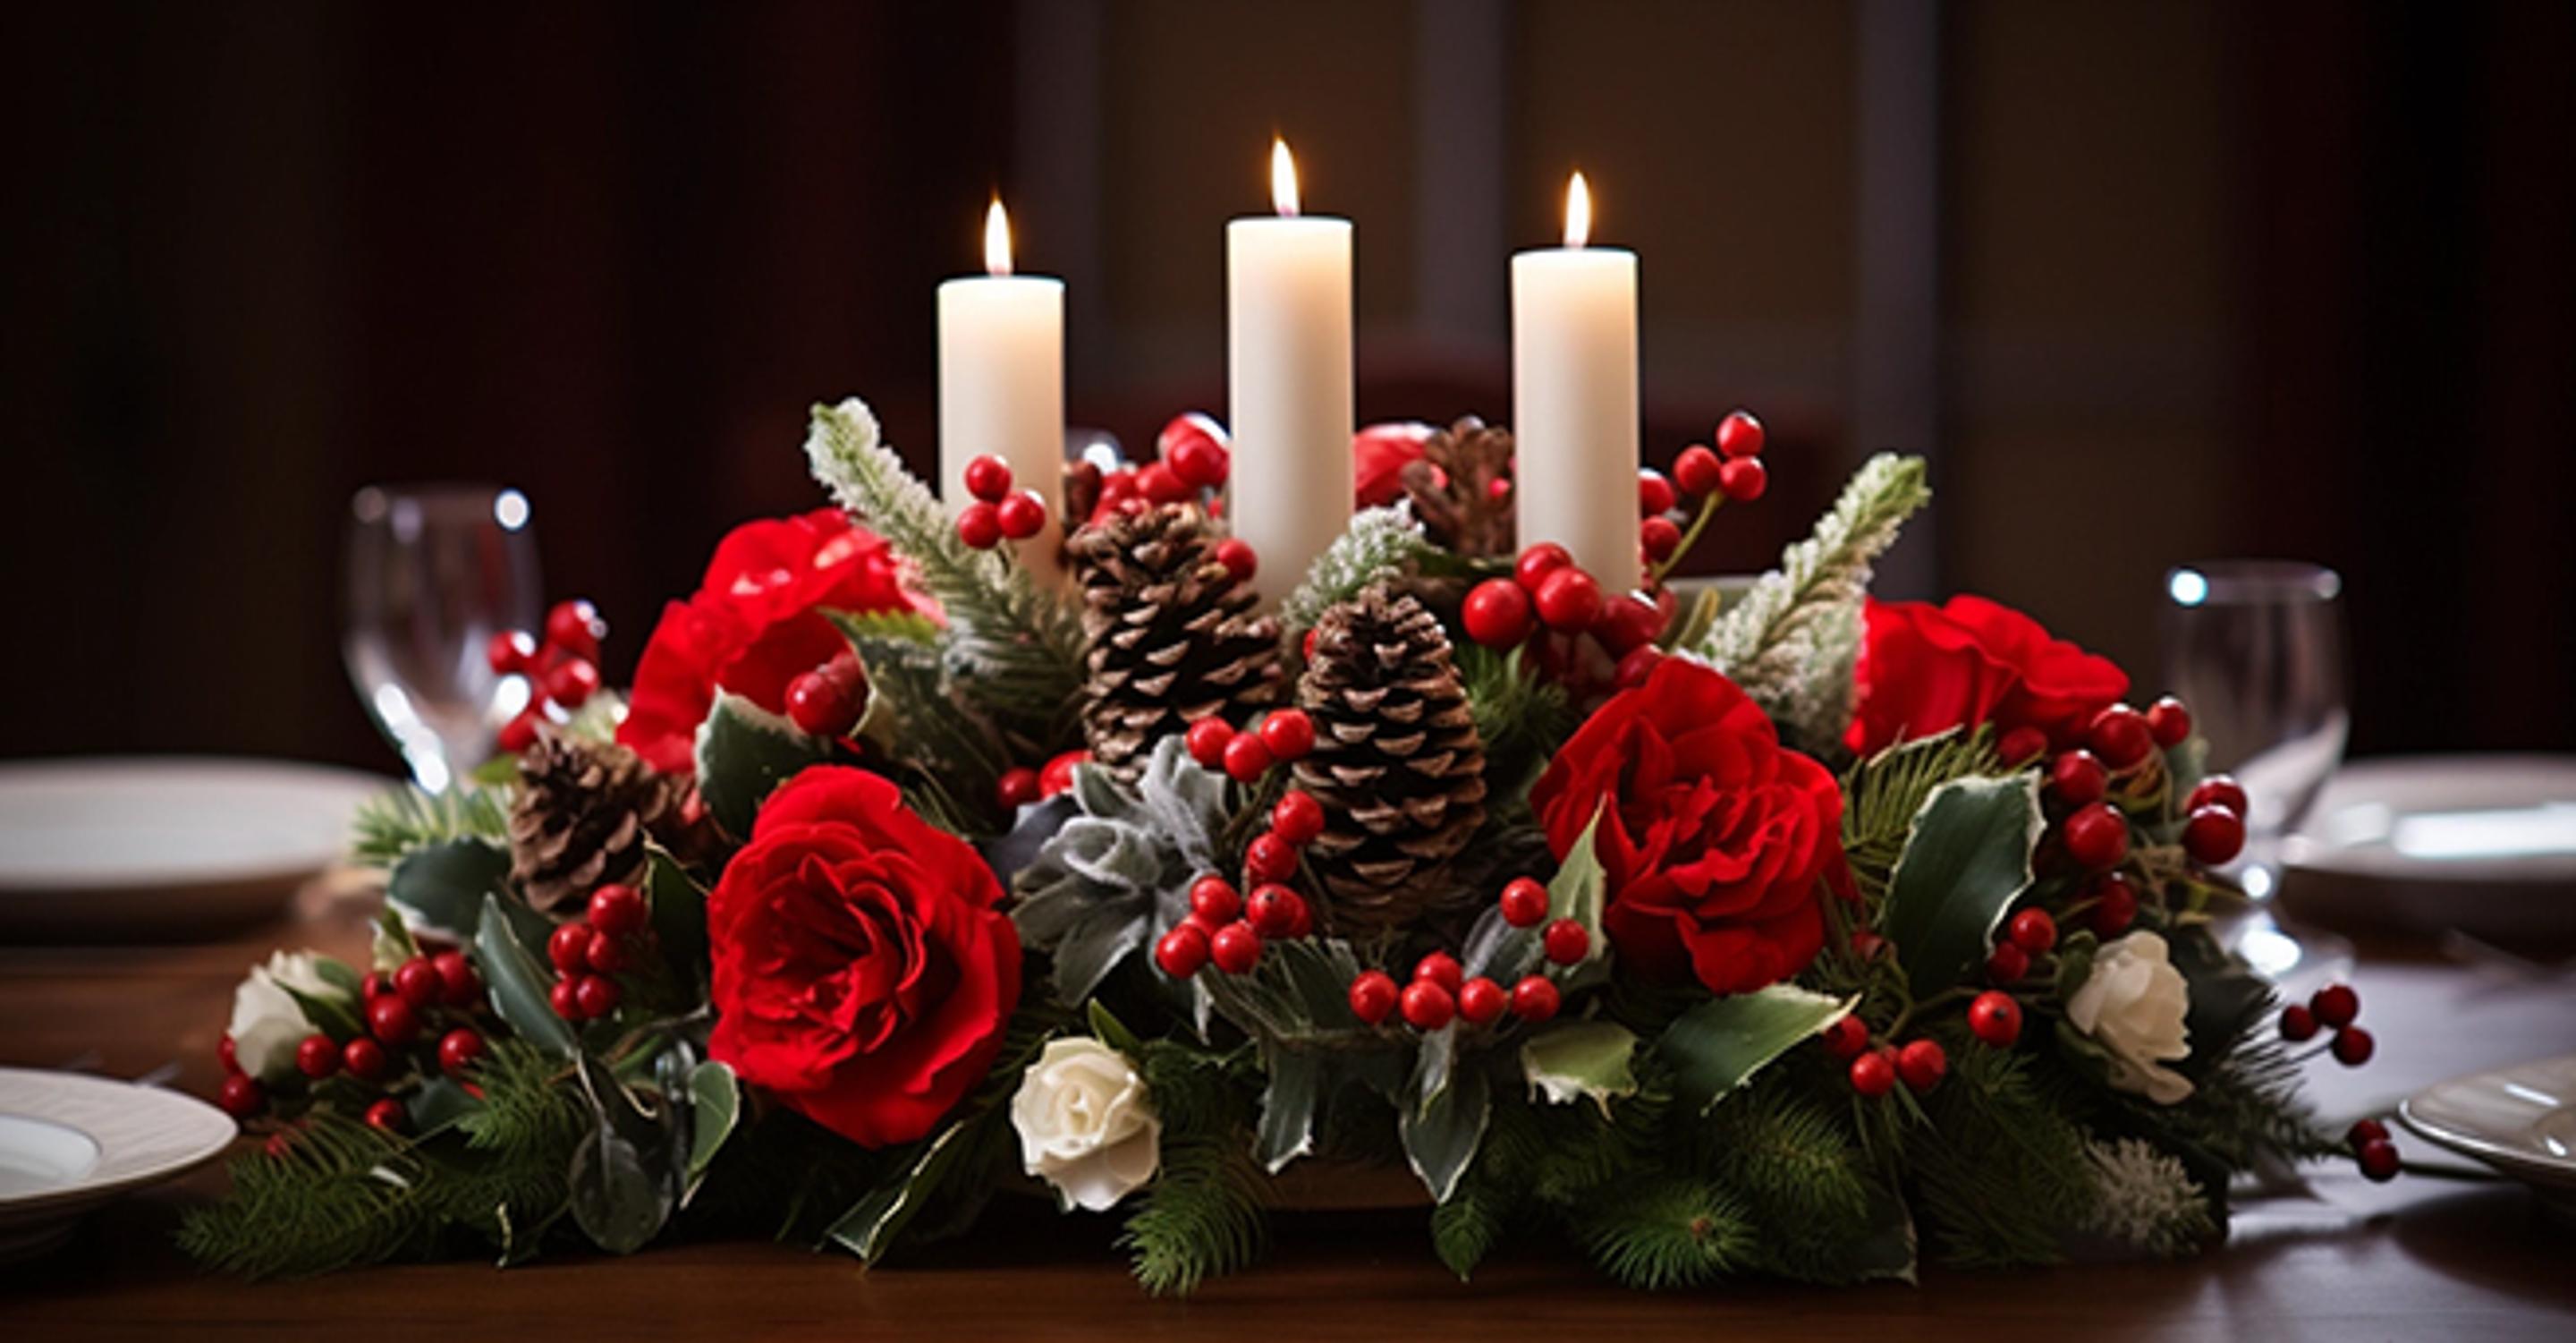 Christmas themed floral centerpiece with three white candles. Centerpiece includes pinecones, holly, red roses and white roses.